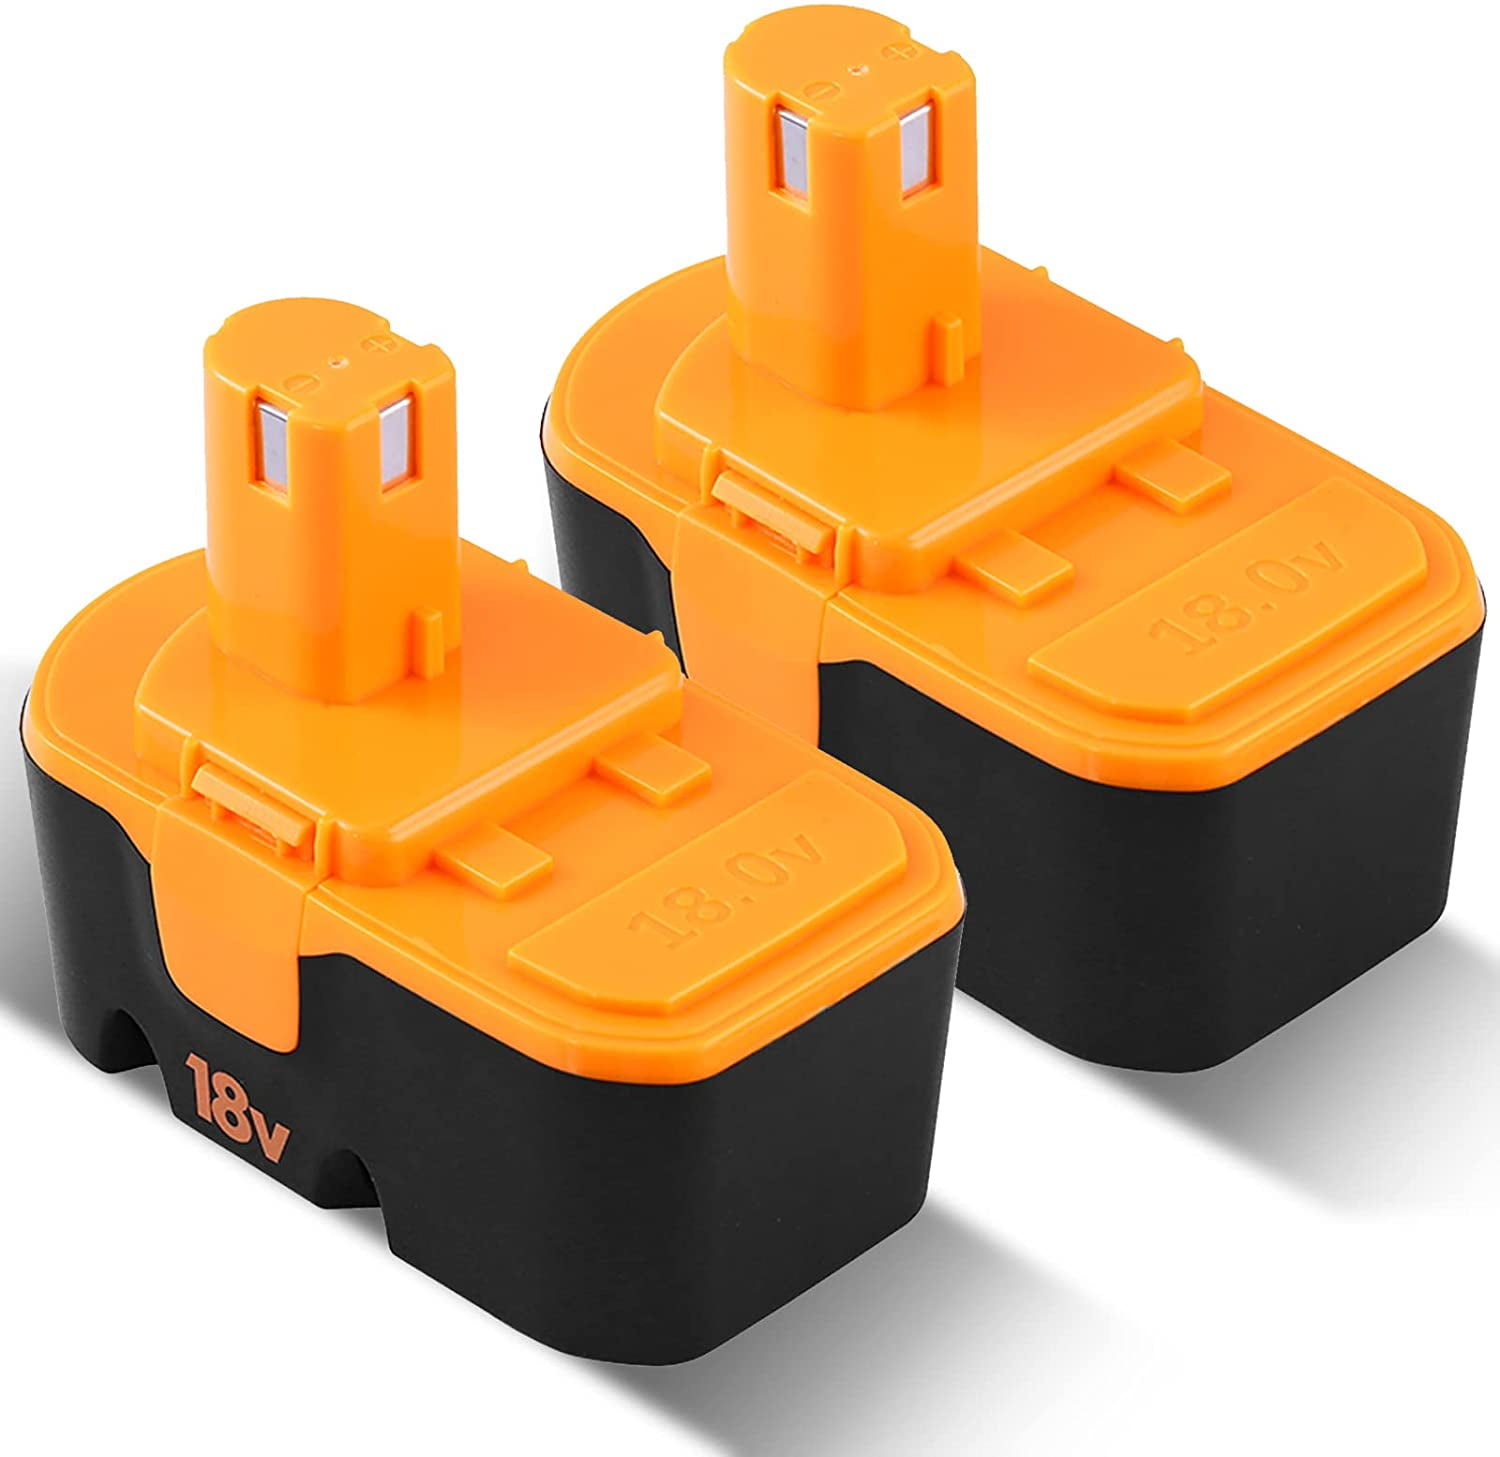 3.6Ah Replacement for Ryobi 18V Battery NiMh P100 P101 ABP1801 ABP1803 ABP1801 BPP1820 Cordless Tools 